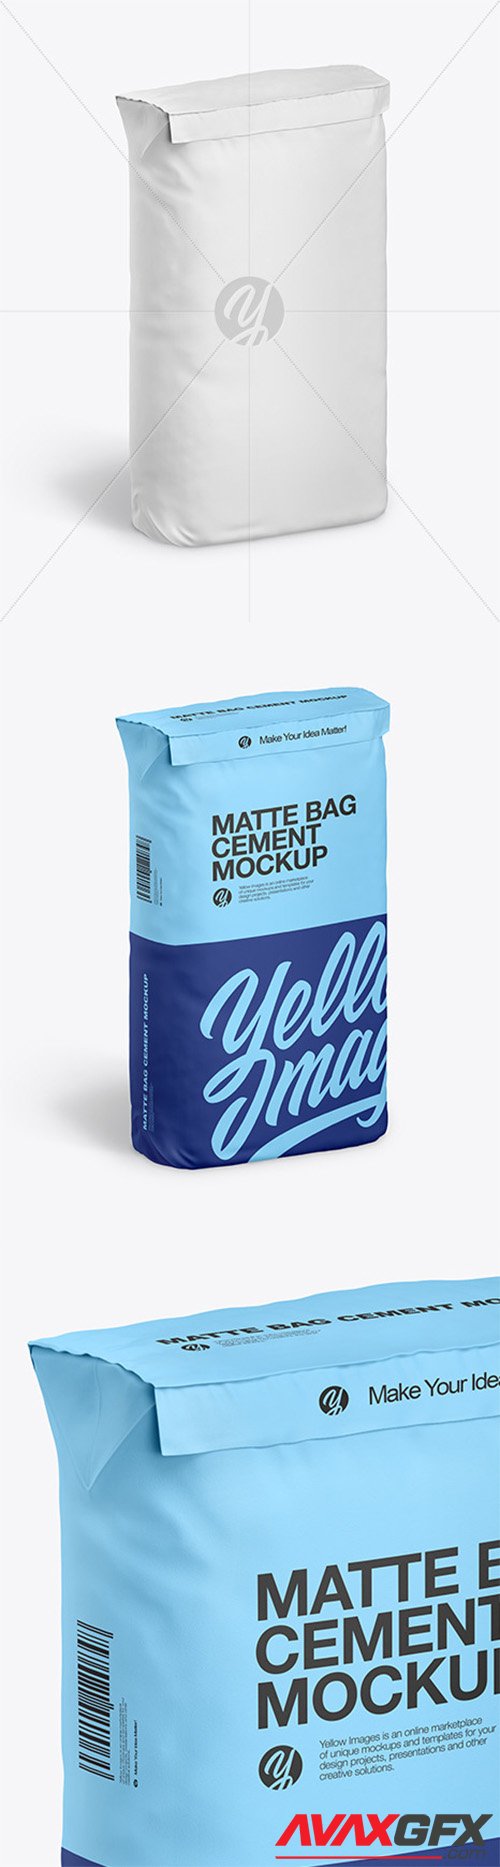 Matte Paper Cement Bag Mockup 57253 » AVAXGFX - All Downloads that You Need in One Place ...